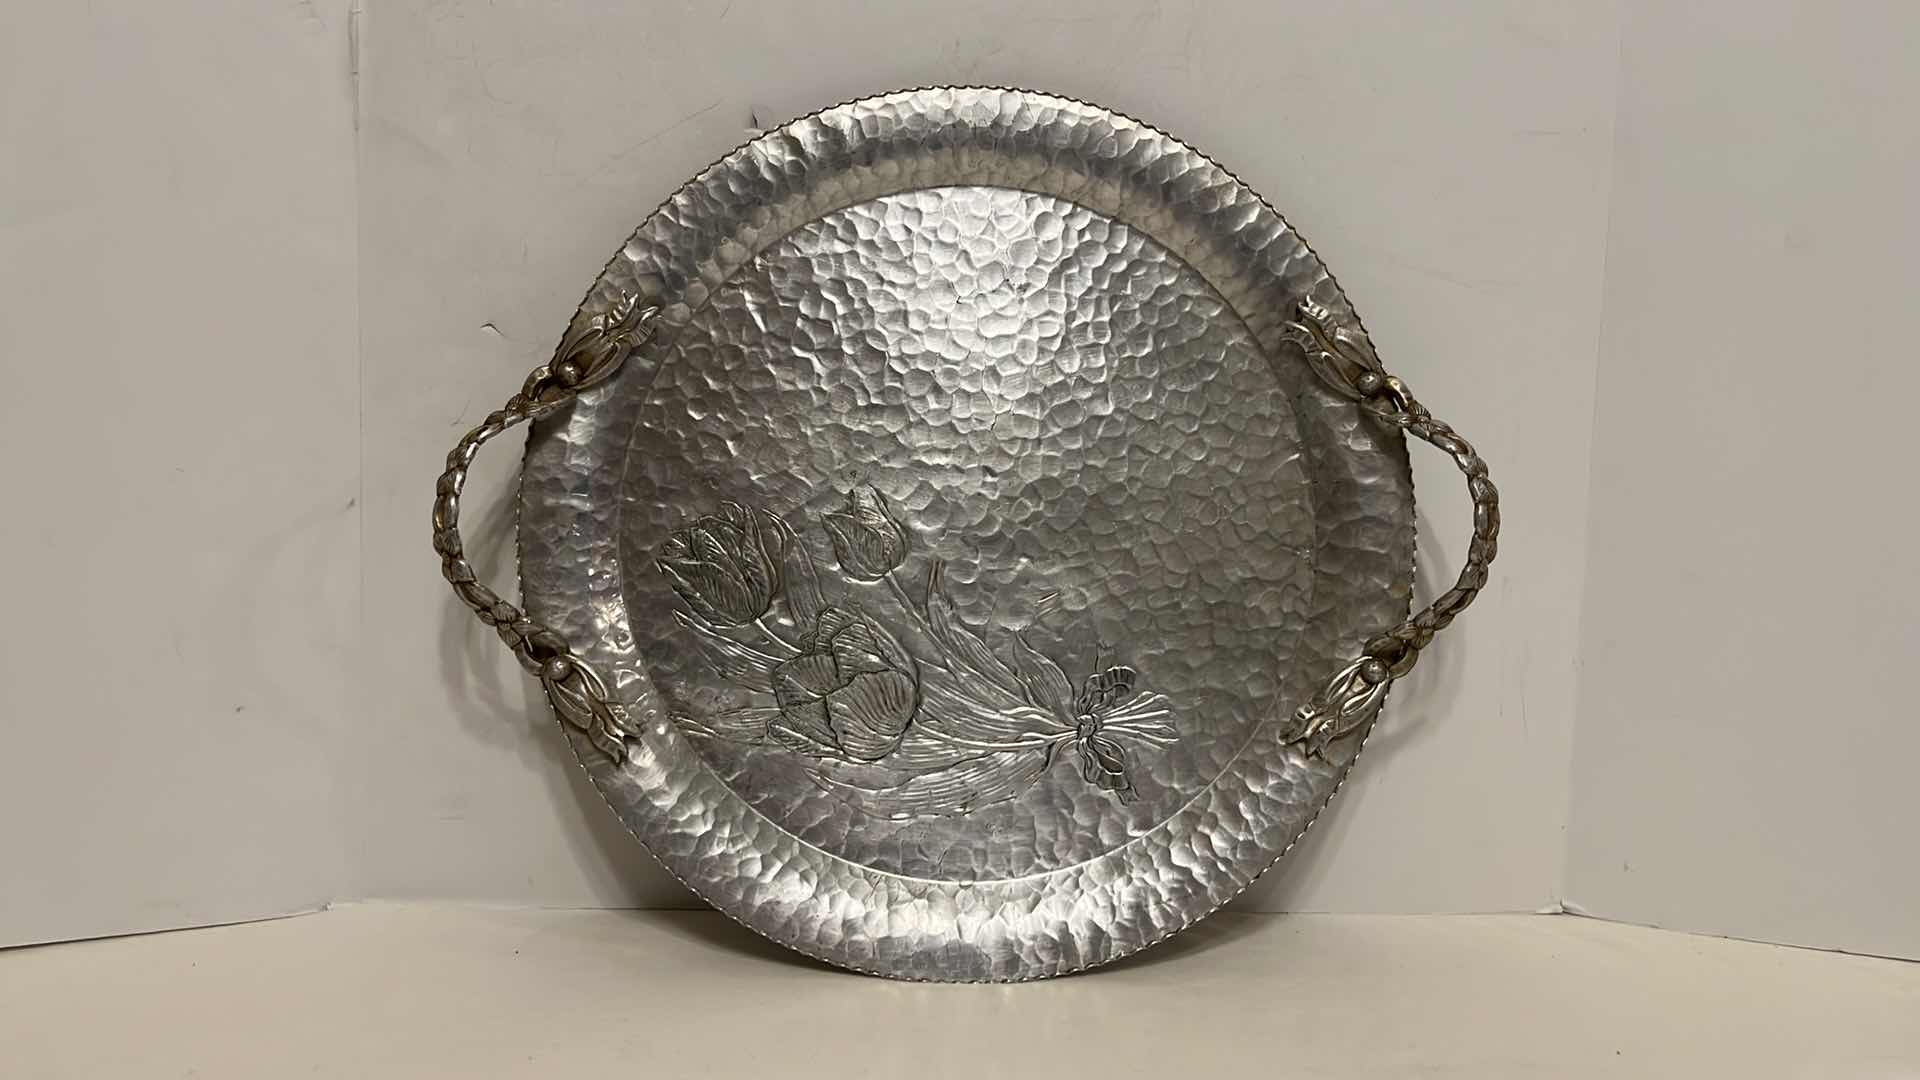 Photo 1 of VINTAGE HAND WROUGHT HAMMERED ALUMINUM TULIP 14” TRAY CREATIONS BY RODNEY KENT #409 ALUMINUM TULIP